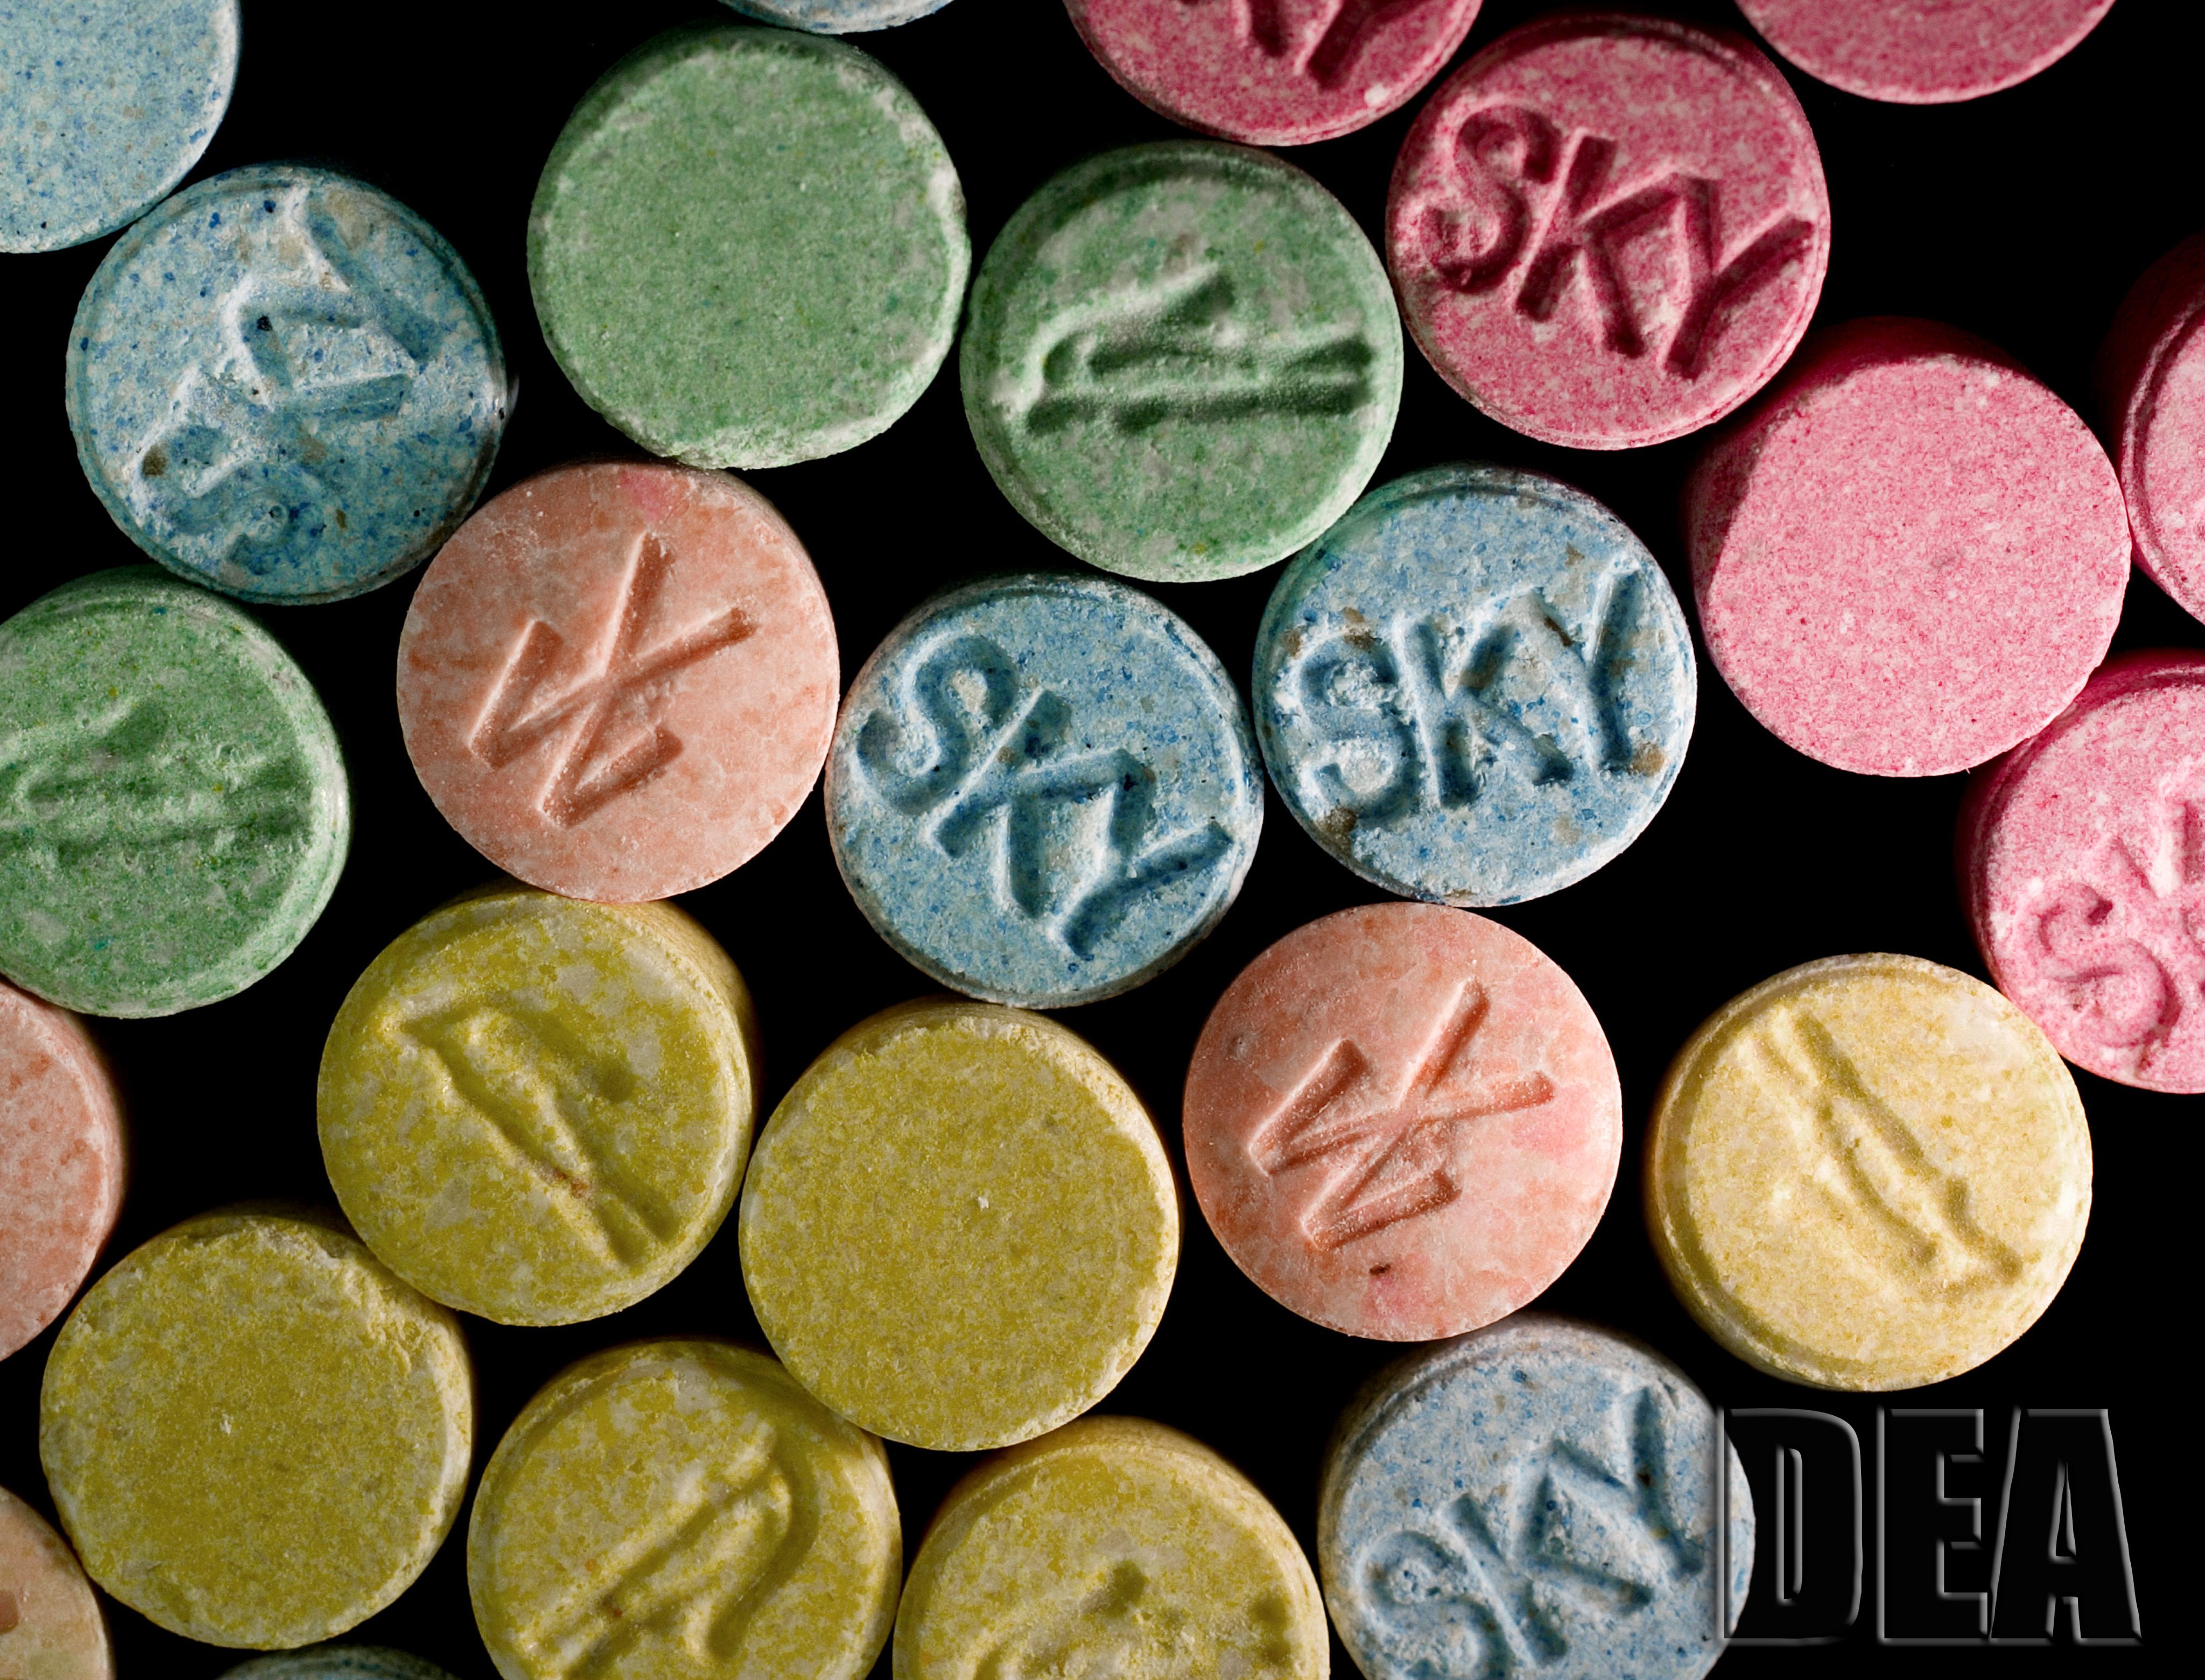 mdma effects on the body